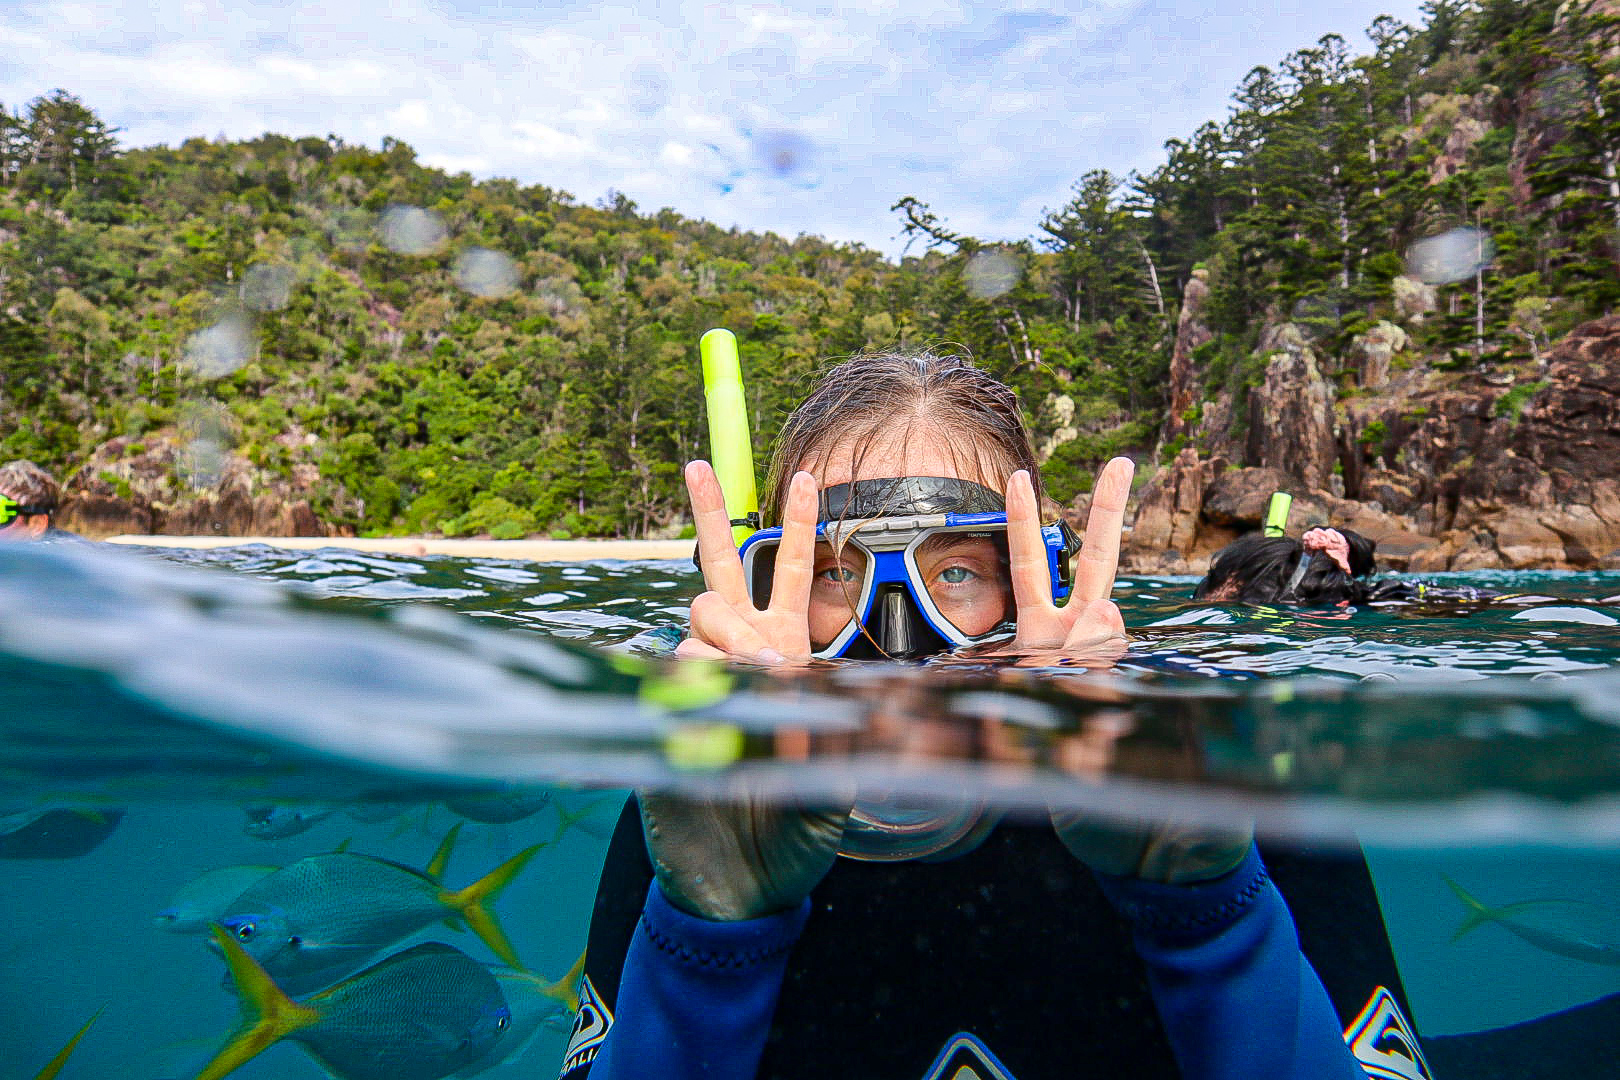 Person in ocean swimming, with snorkelling gear. Holding up the peace sign. Fish below the person. Land, trees and rocks above the person